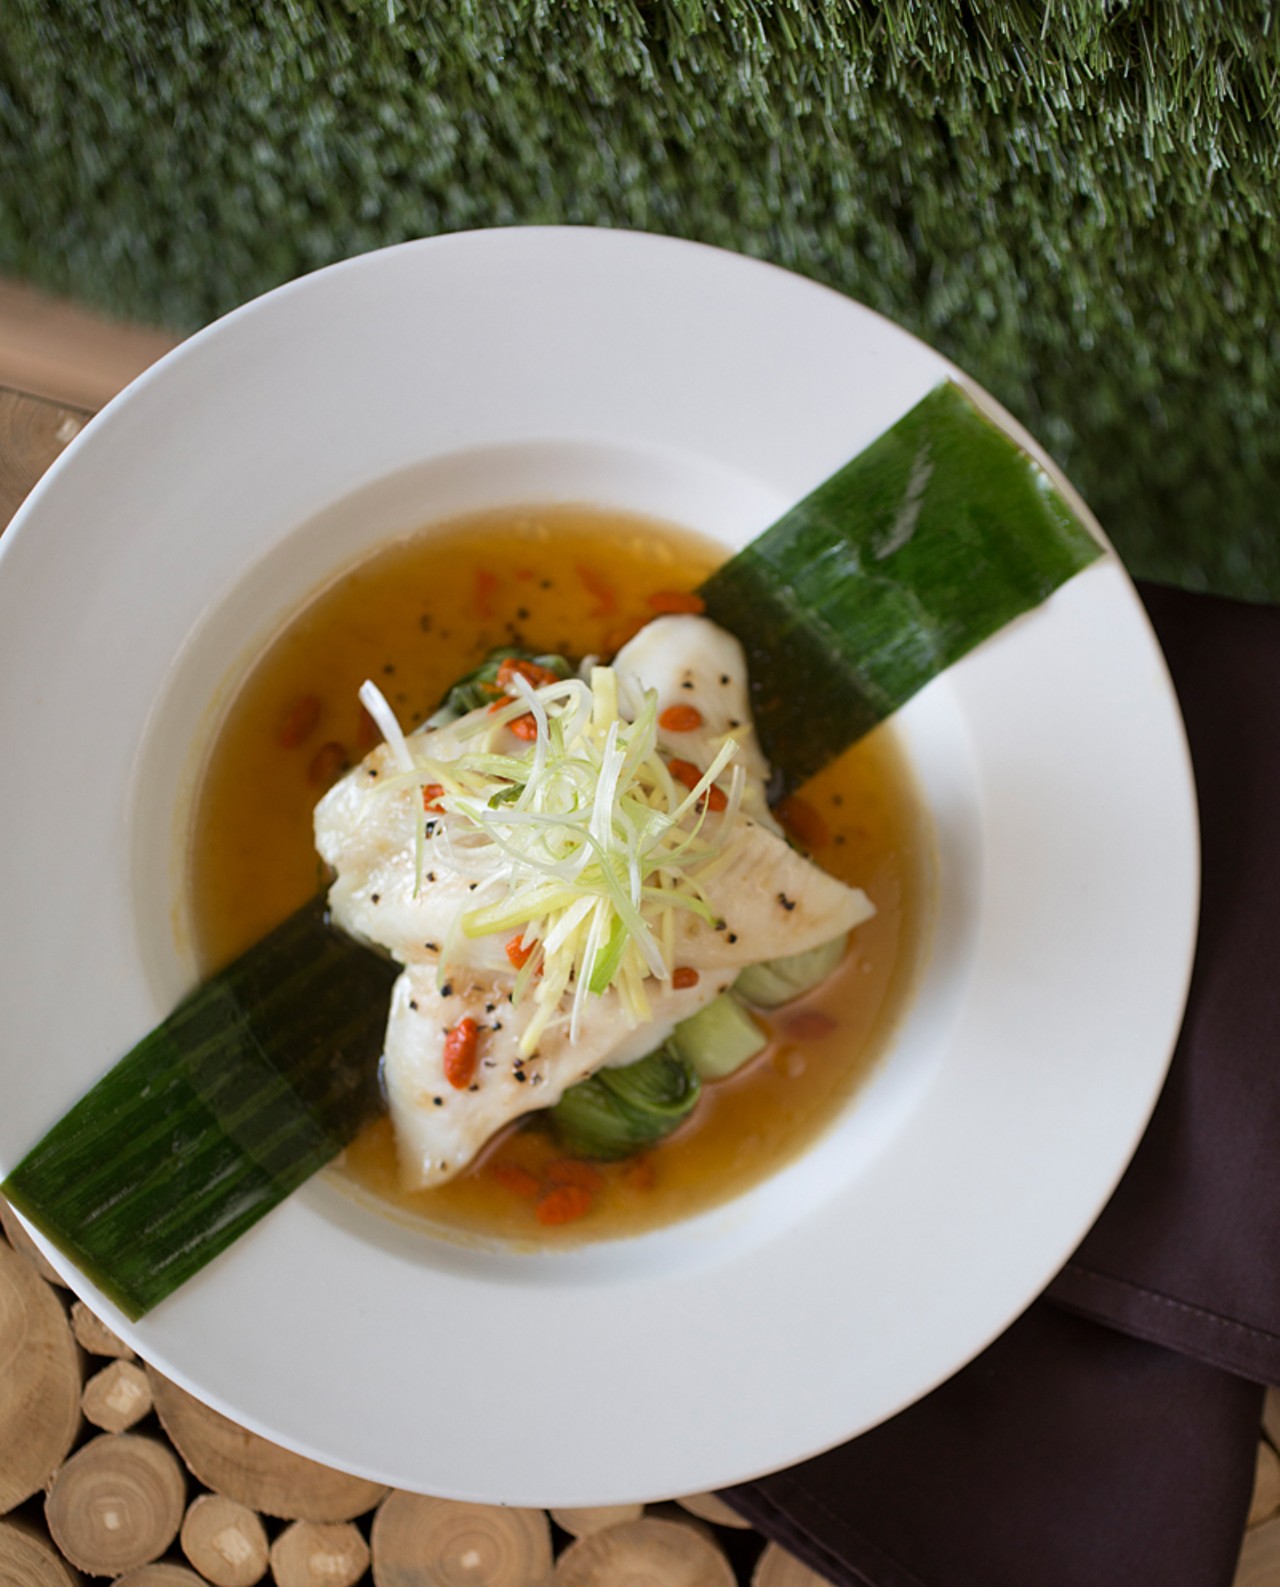 The "Goji Steamed Sole" brings filet of sole steamed with coriander soy-ginger sauce and baby bok choy.